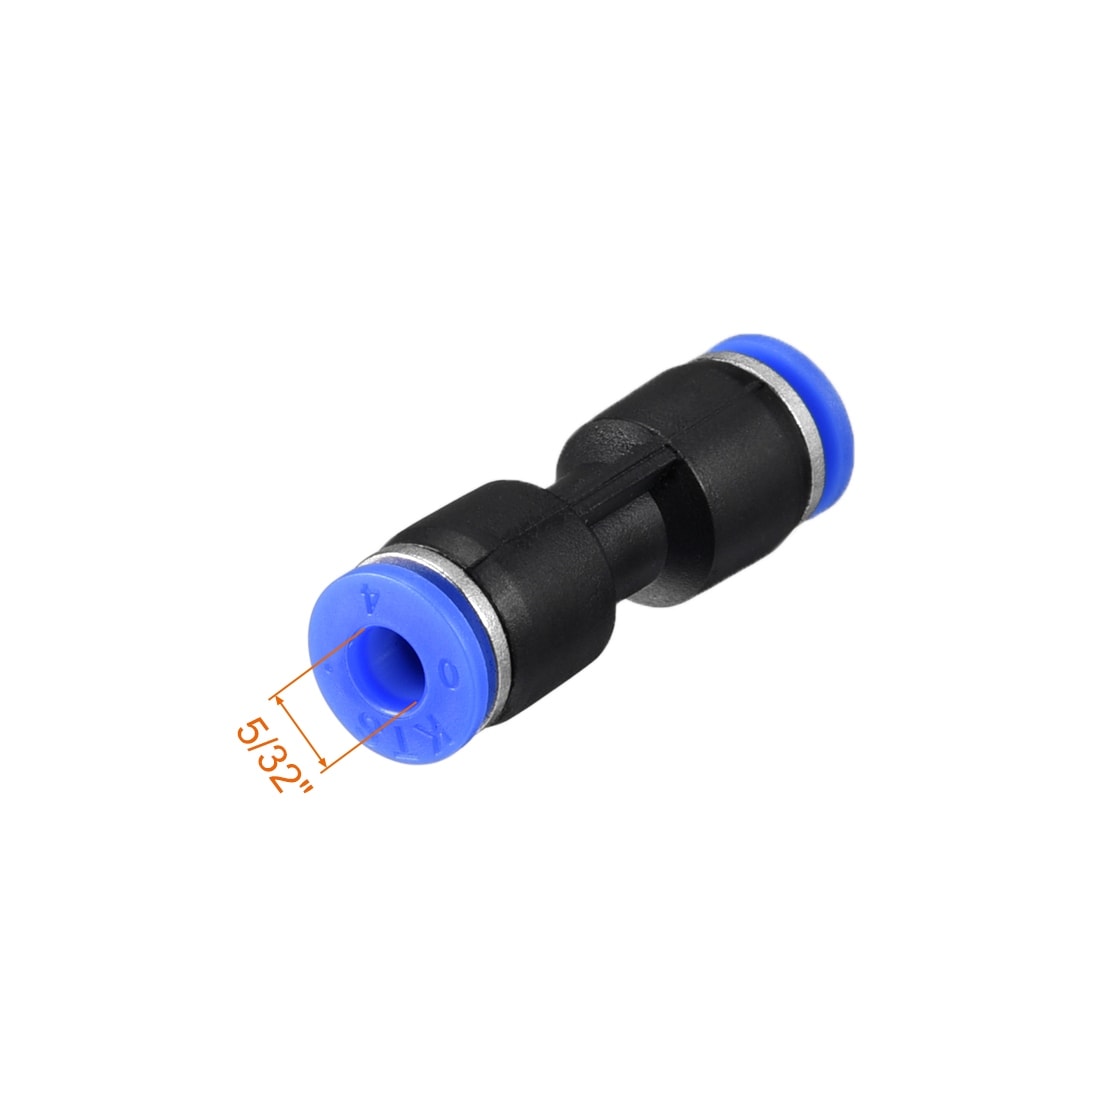 4mm 5//32 OD Straight Pneumatic Connector Metalwork Plastic Push to Connect Straight Union Pipe Tube Fitting Pack of 20